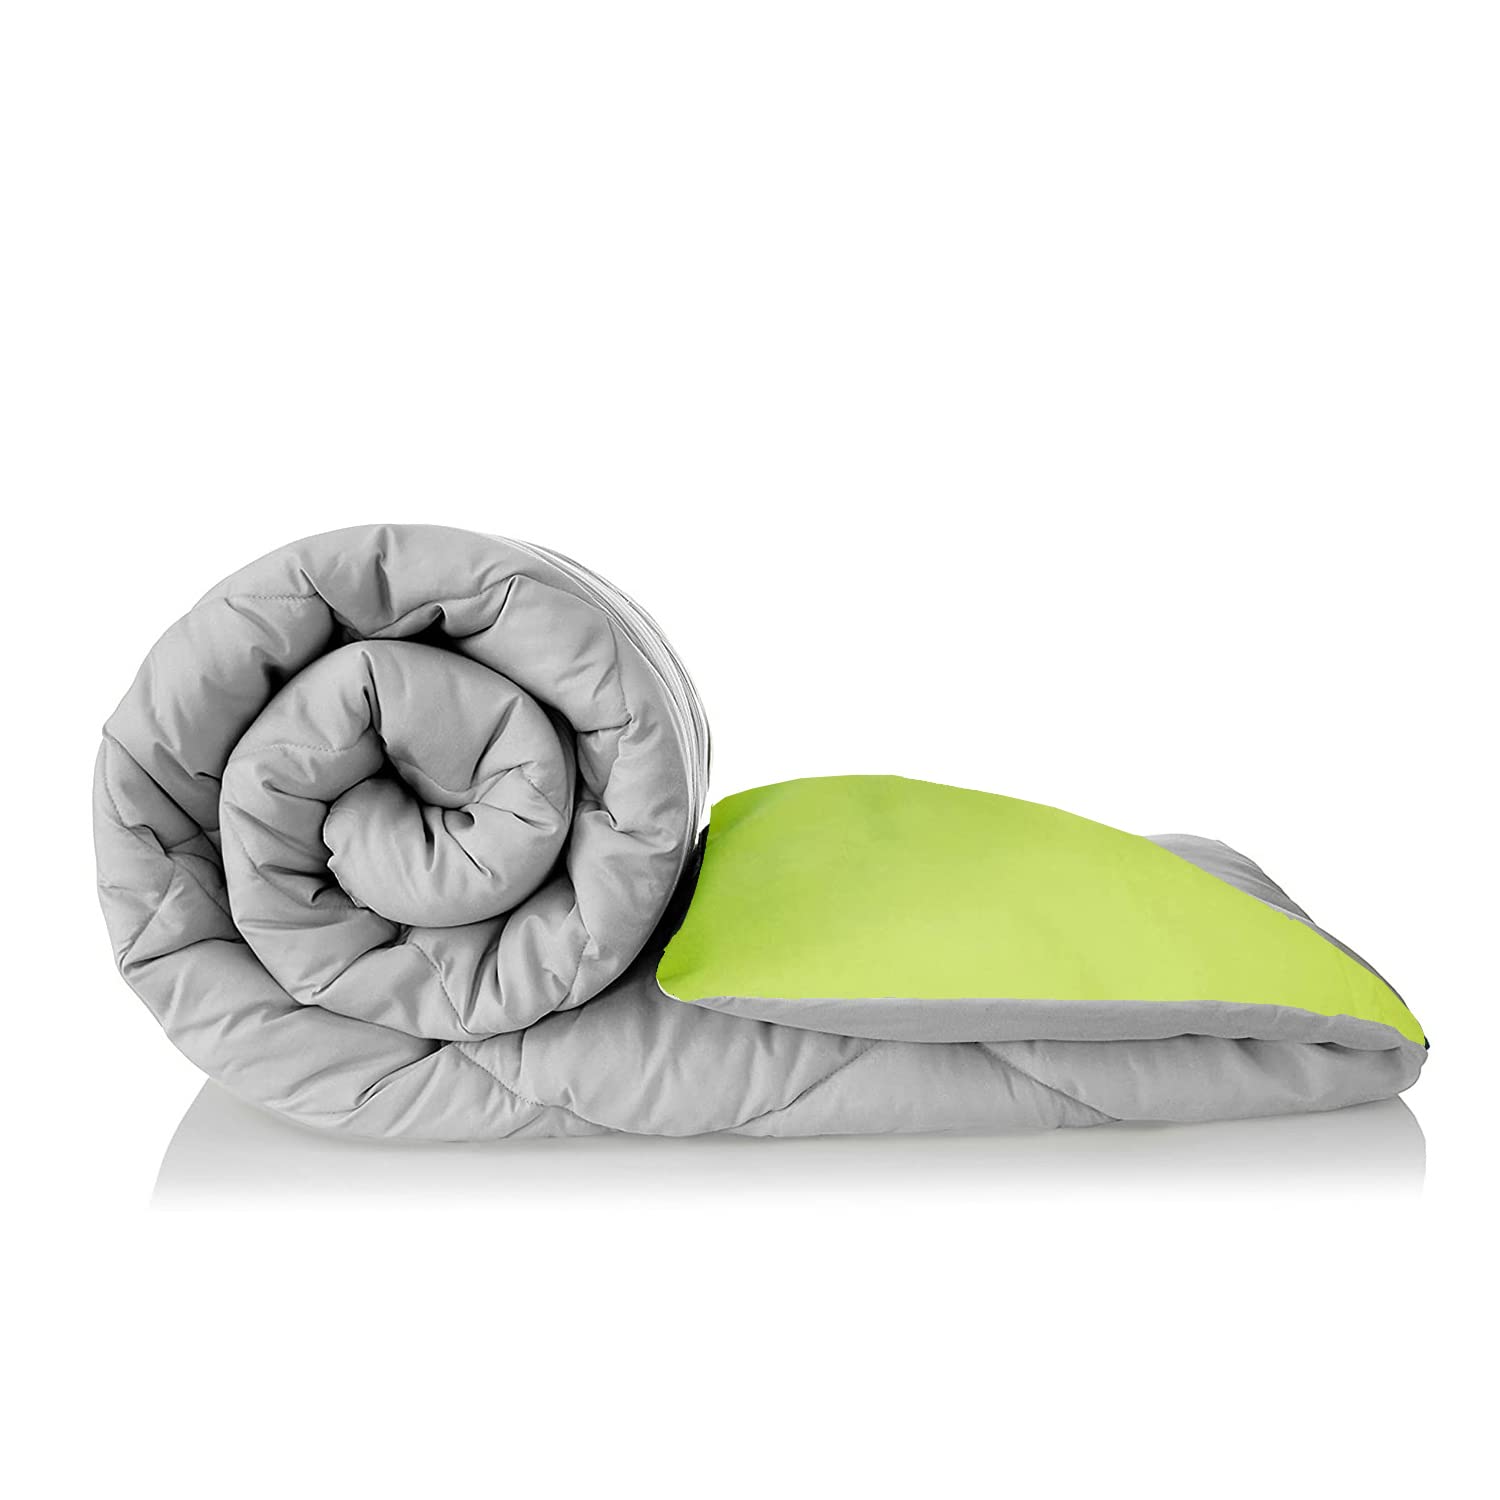 Reversible Comforter Single / Double Bed 110 GSM, Ash Grey + Olive Green